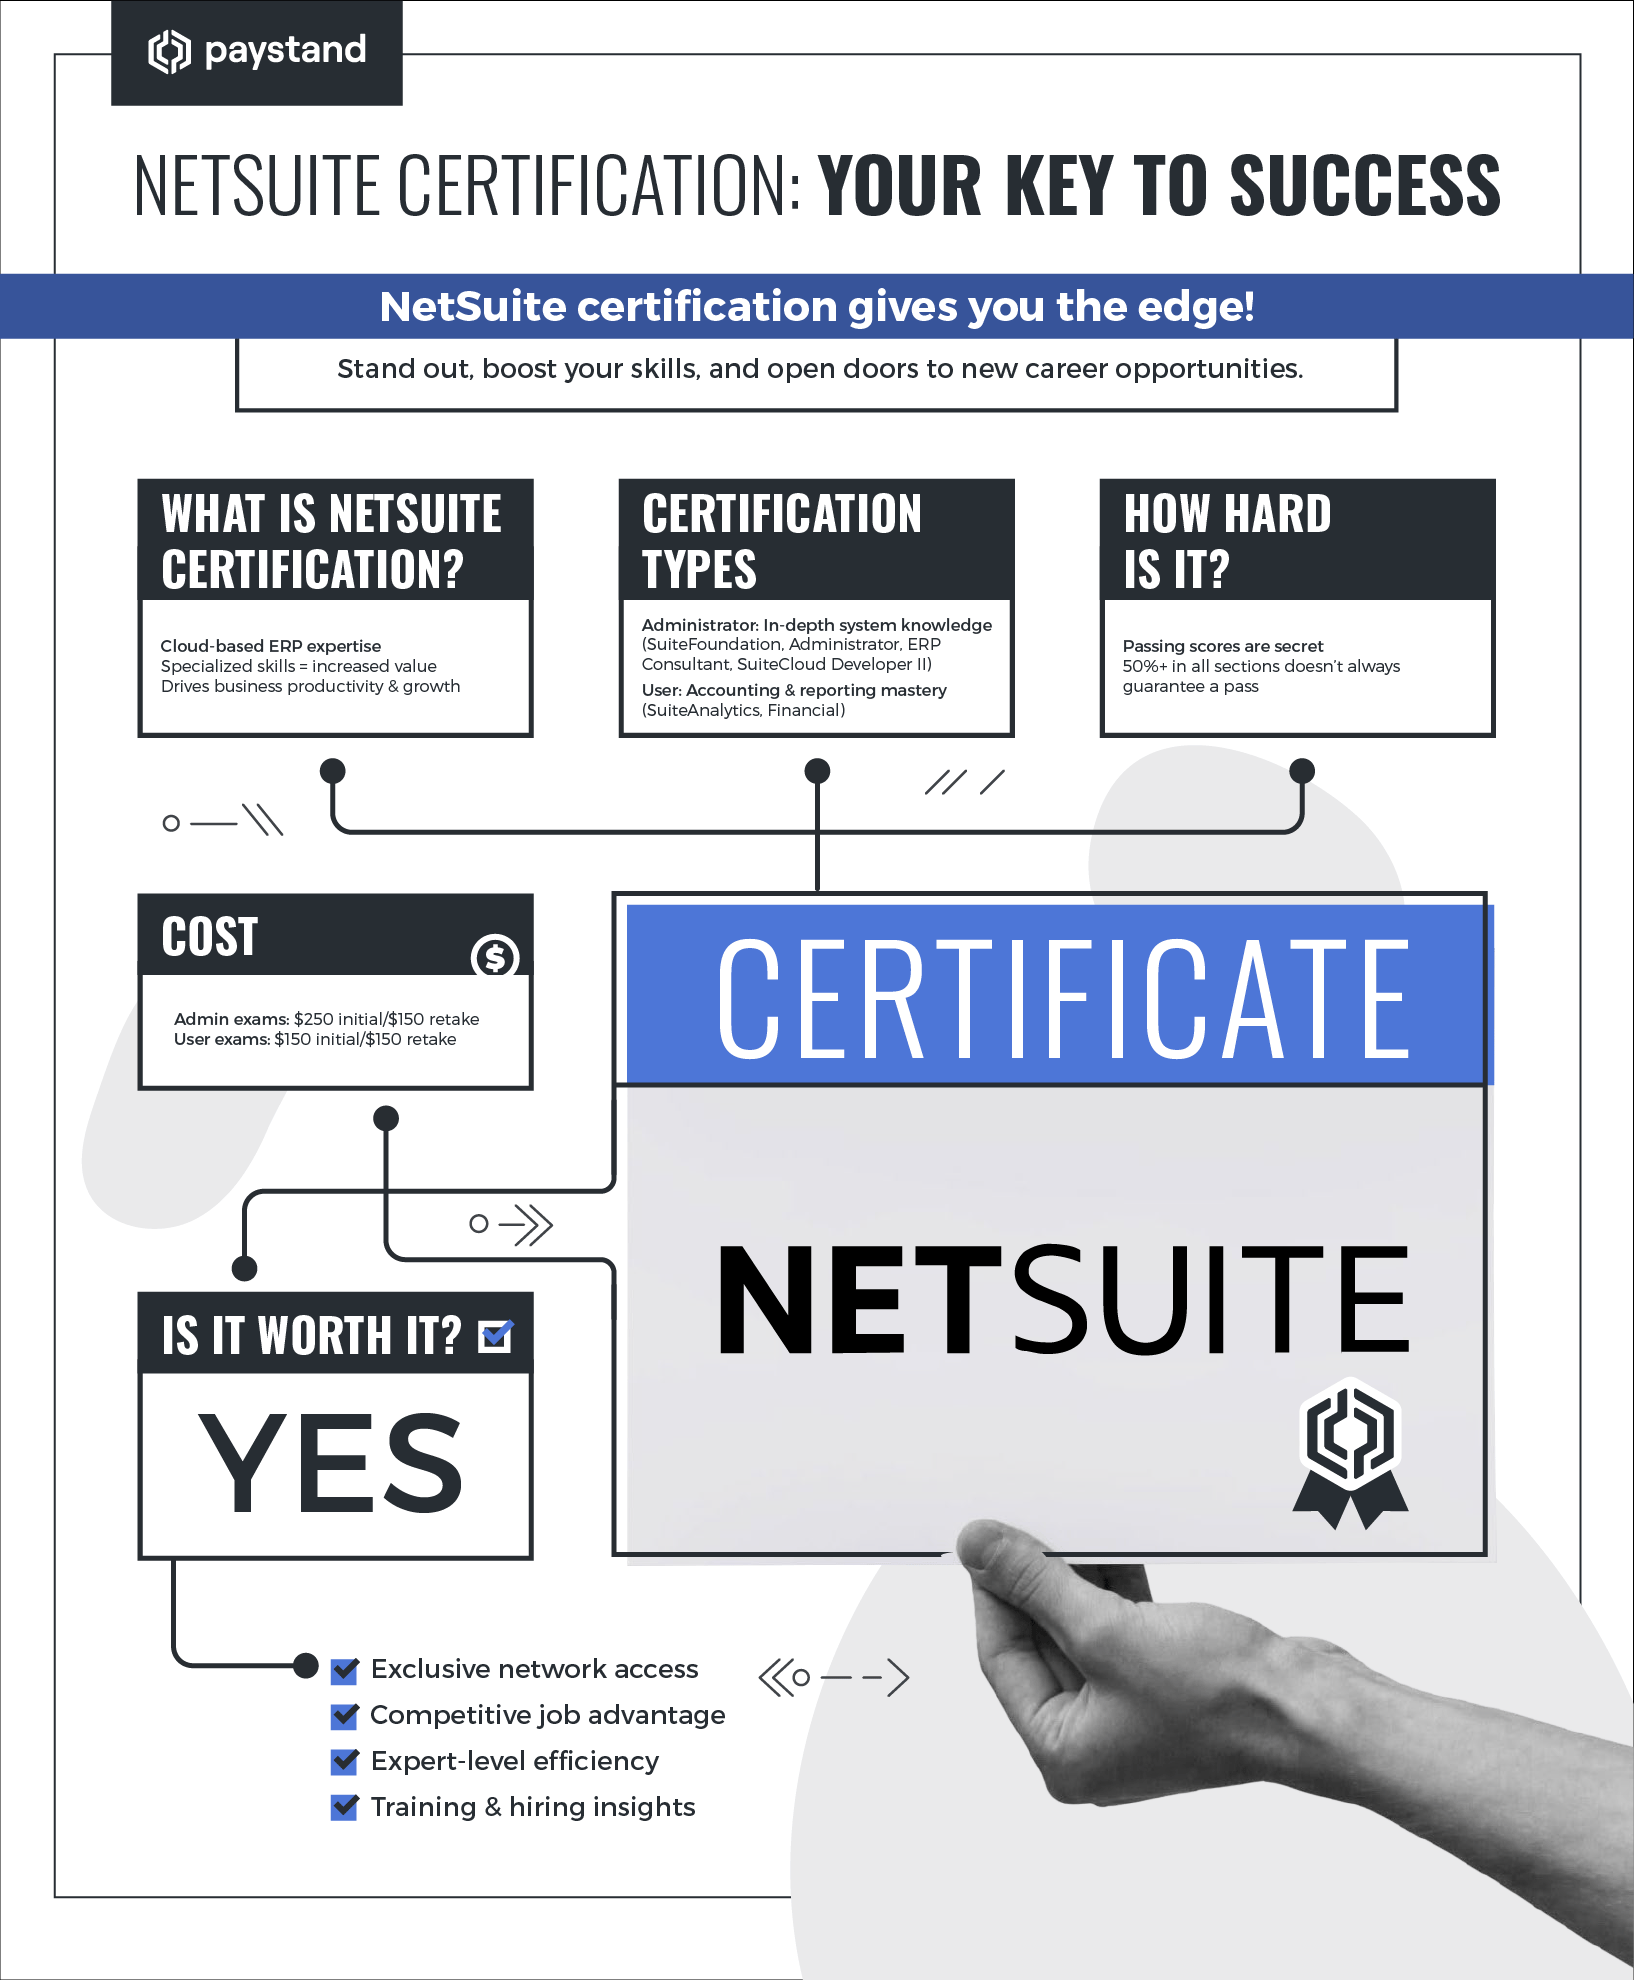 NetSuite Certification Your Key to Success